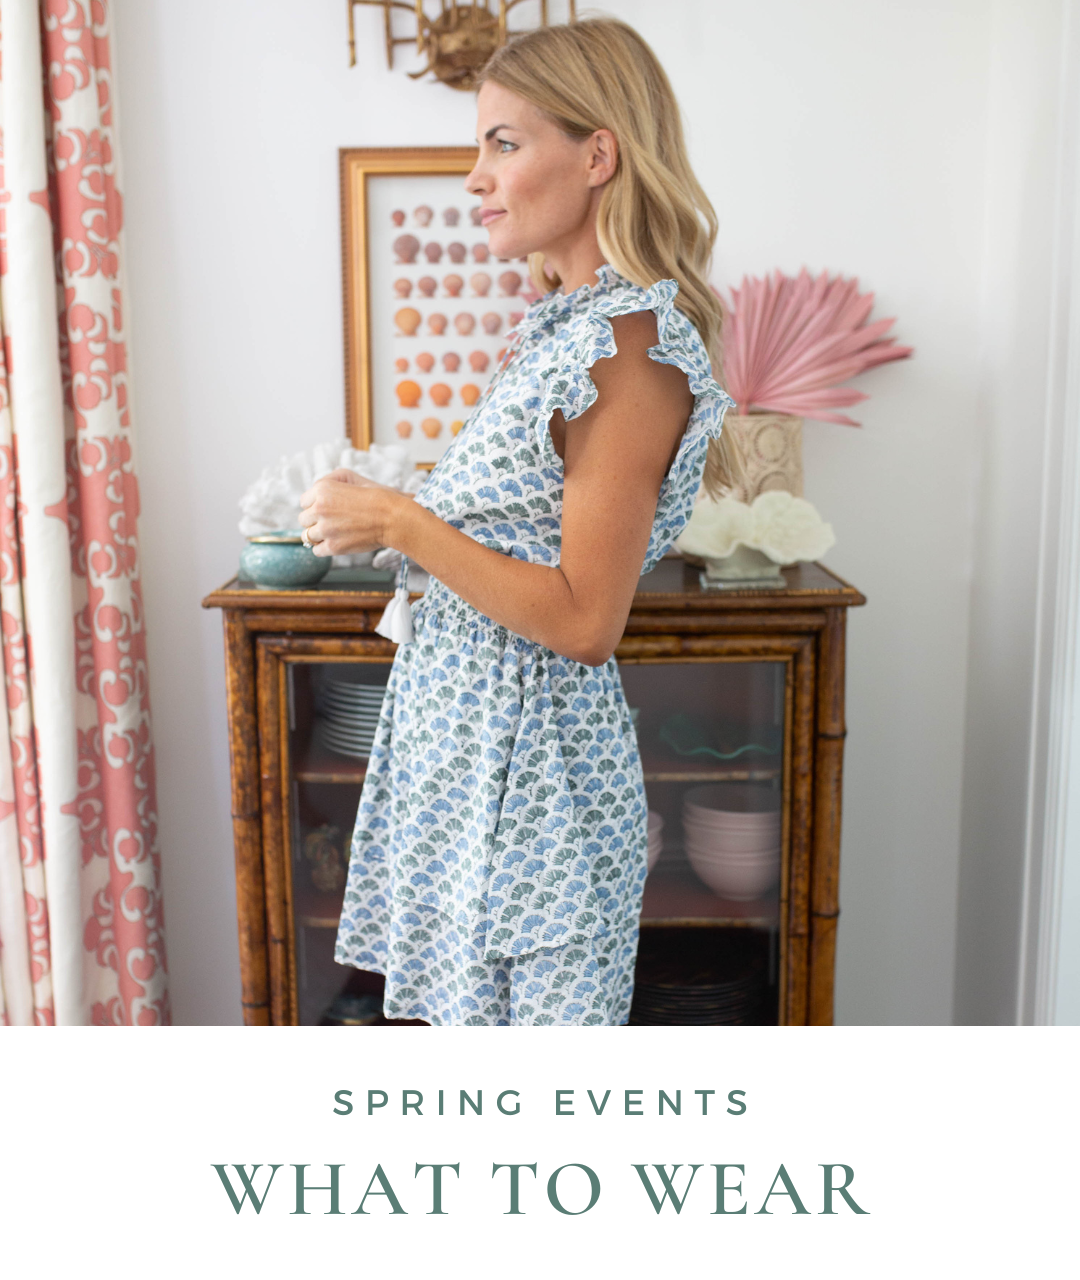 What To Wear - Spring Events